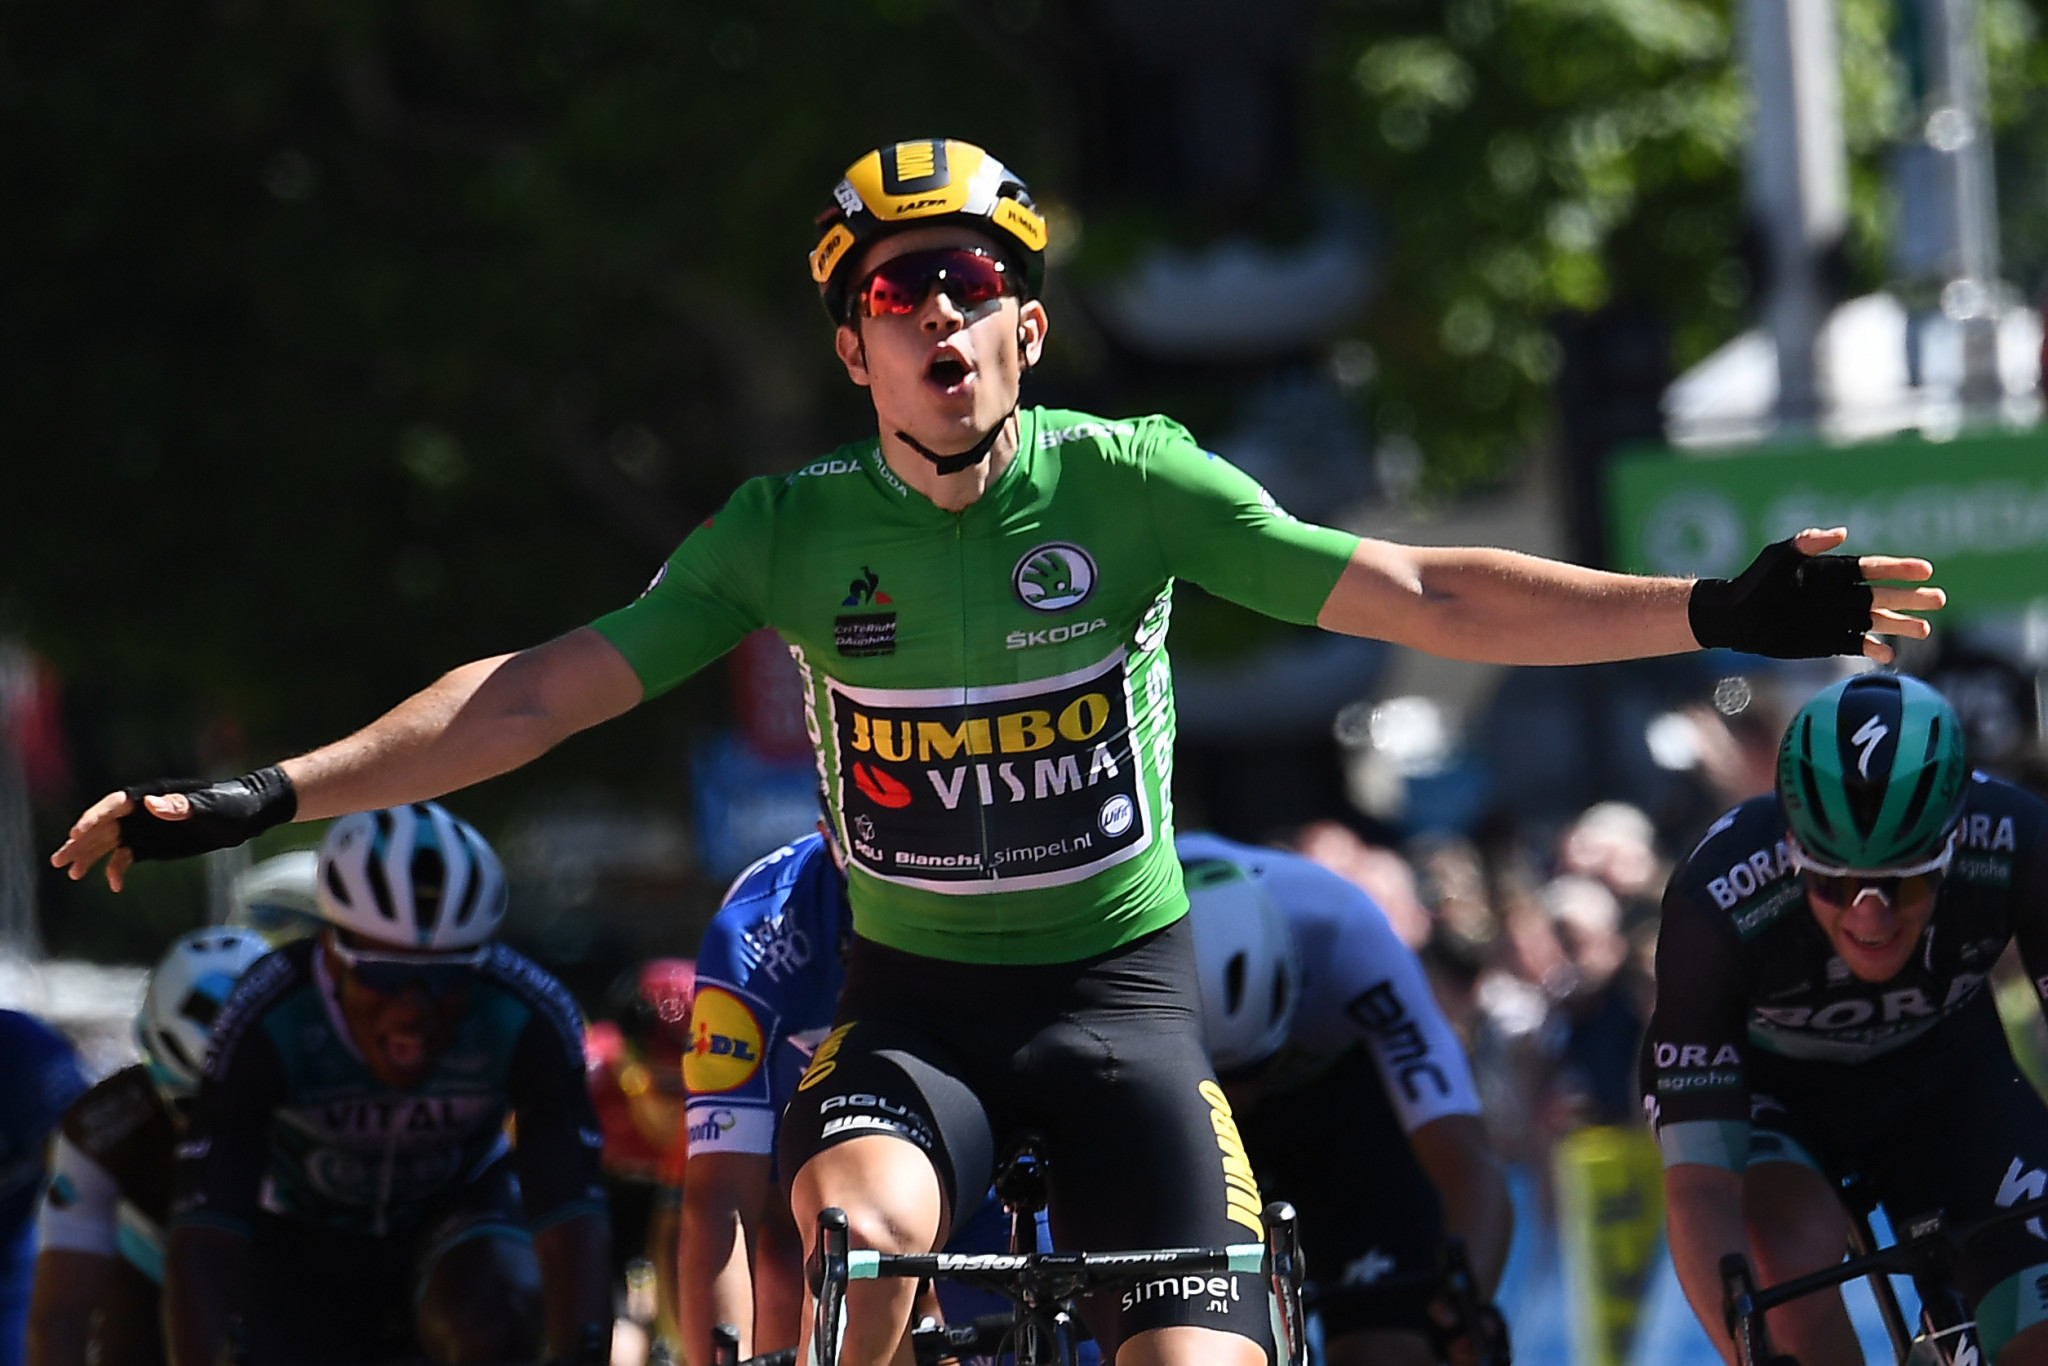 Belgium’s Wout van Aert outdid hot favourite Sam Bennett of Ireland in a thrilling bunch sprint to make it two successive stage wins at the Critérium du Dauphiné ©Getty Images